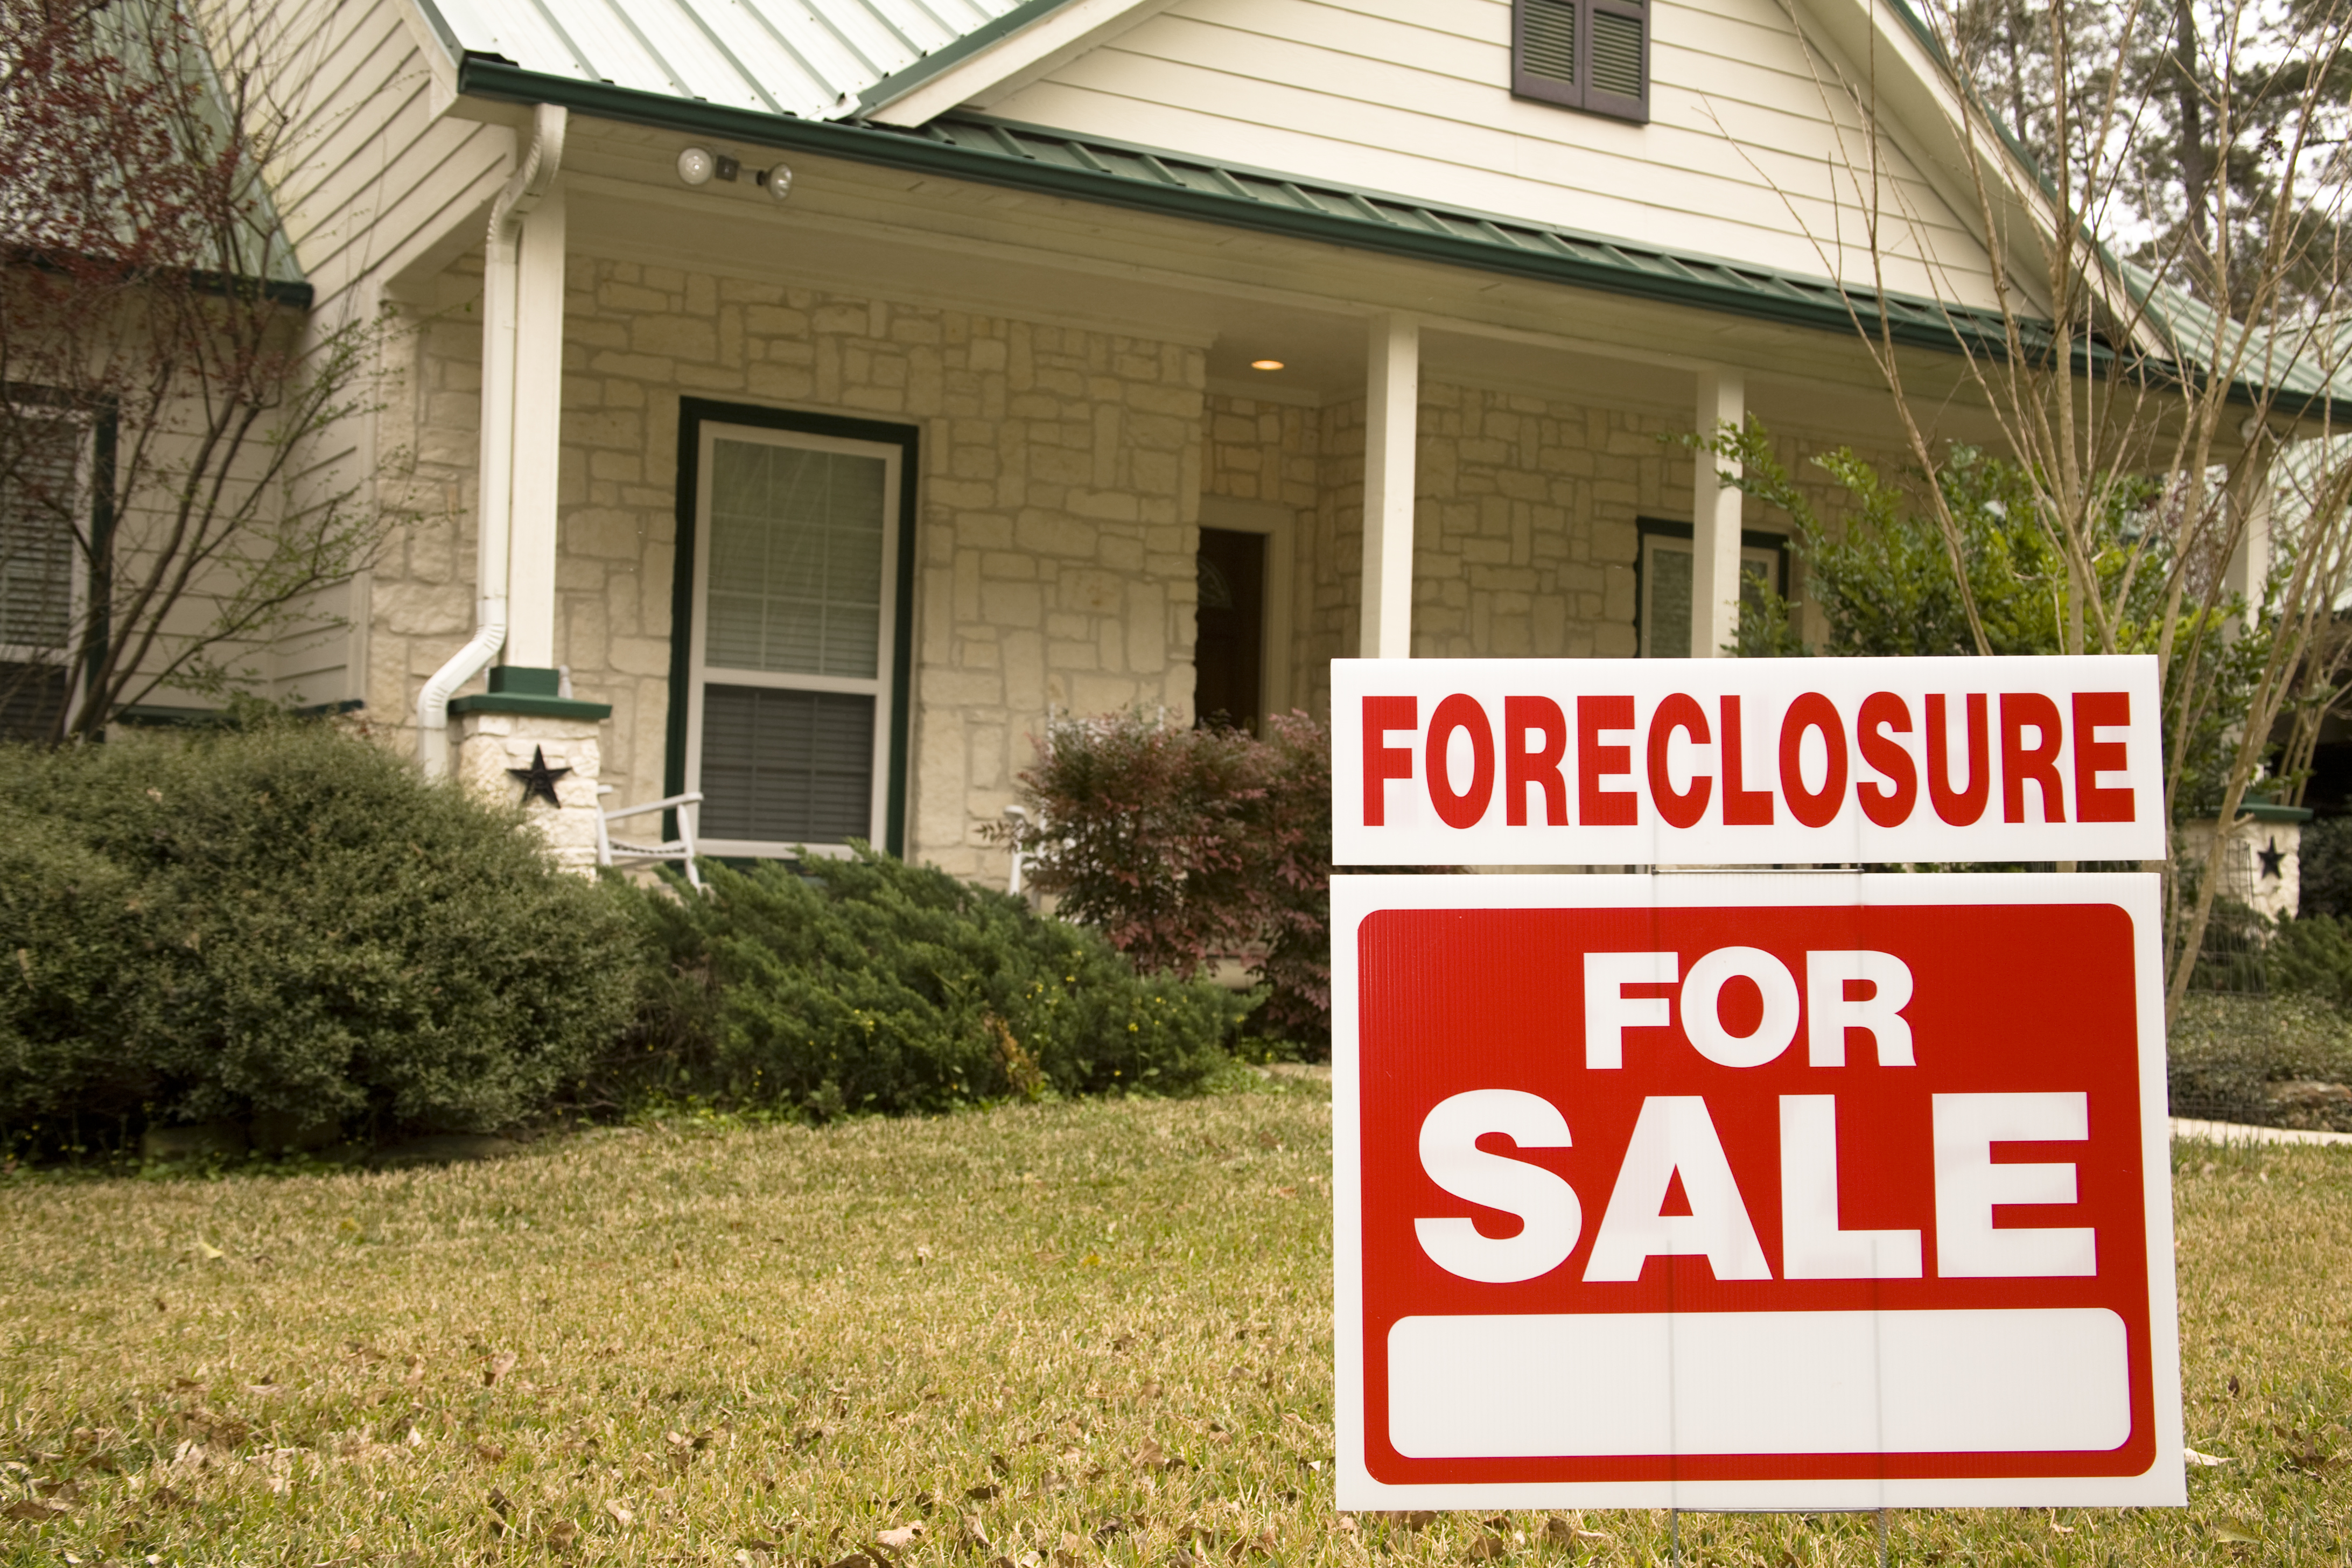 How to Buy Foreclosure Homes - A Real Estate Investment Opportunity